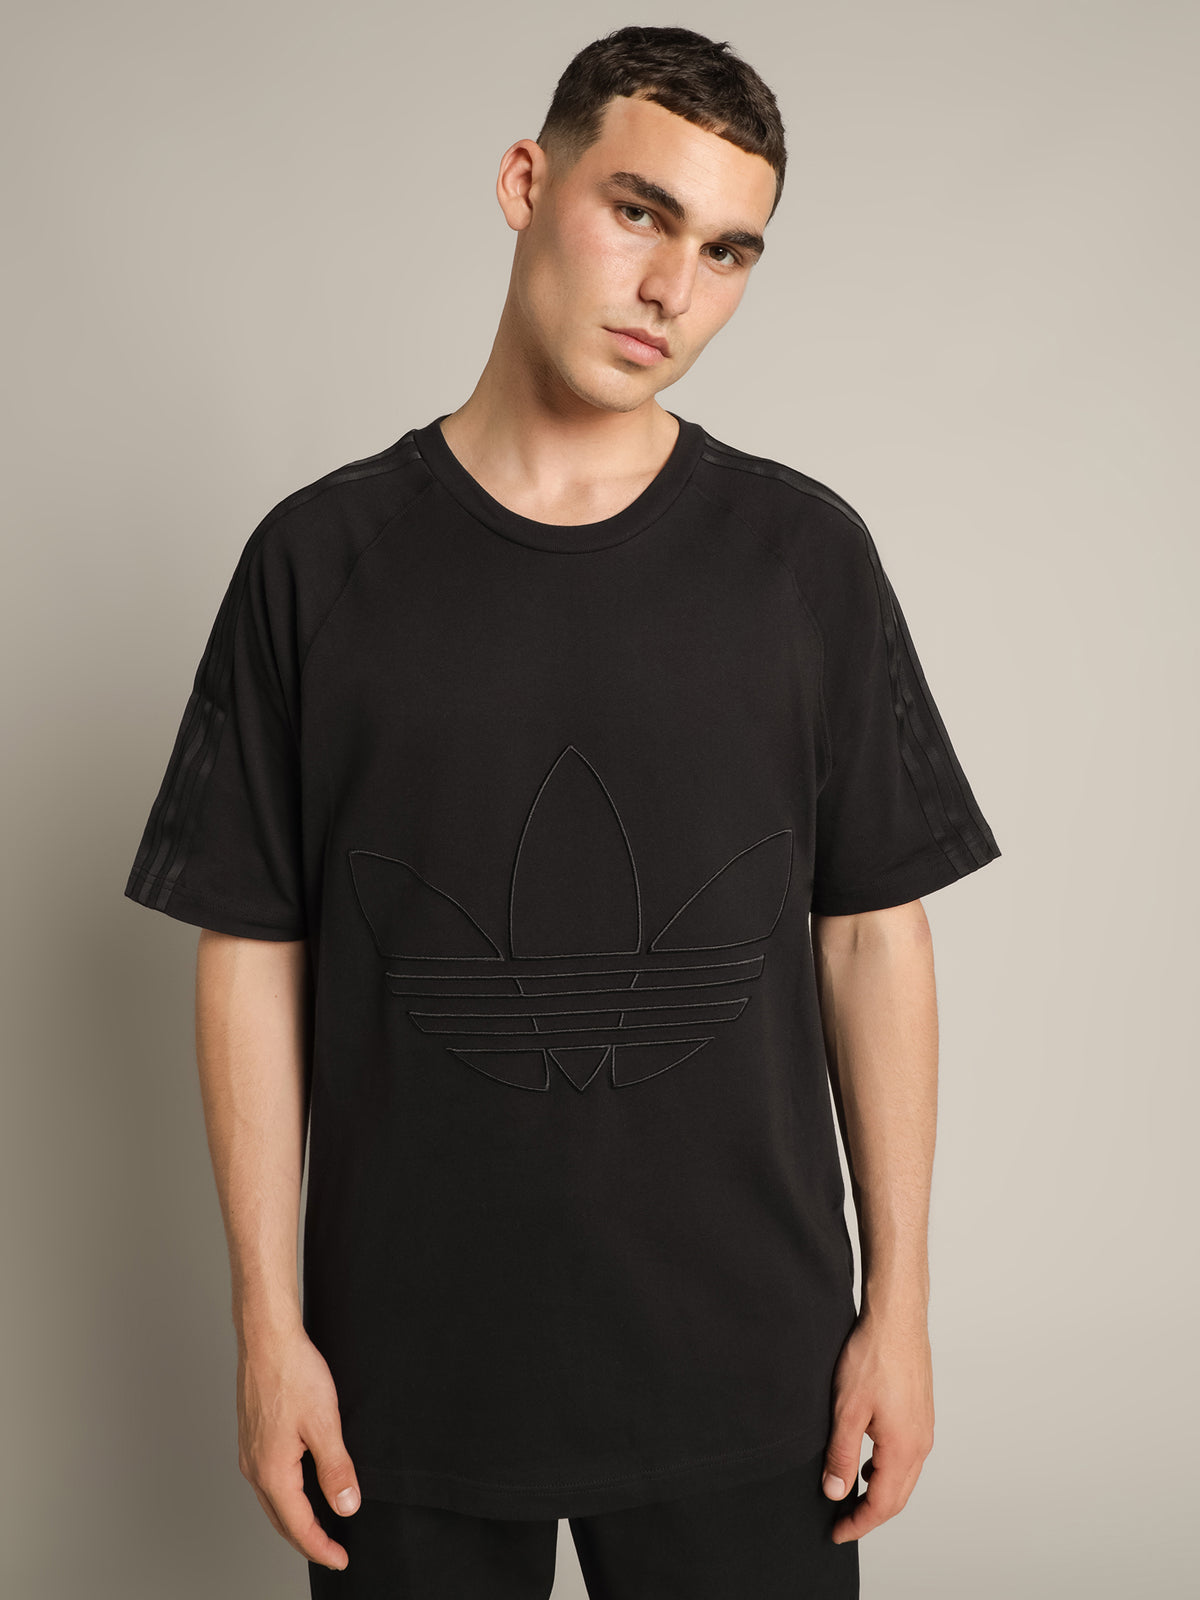 Graphics Tricolor T-Shirt in Black